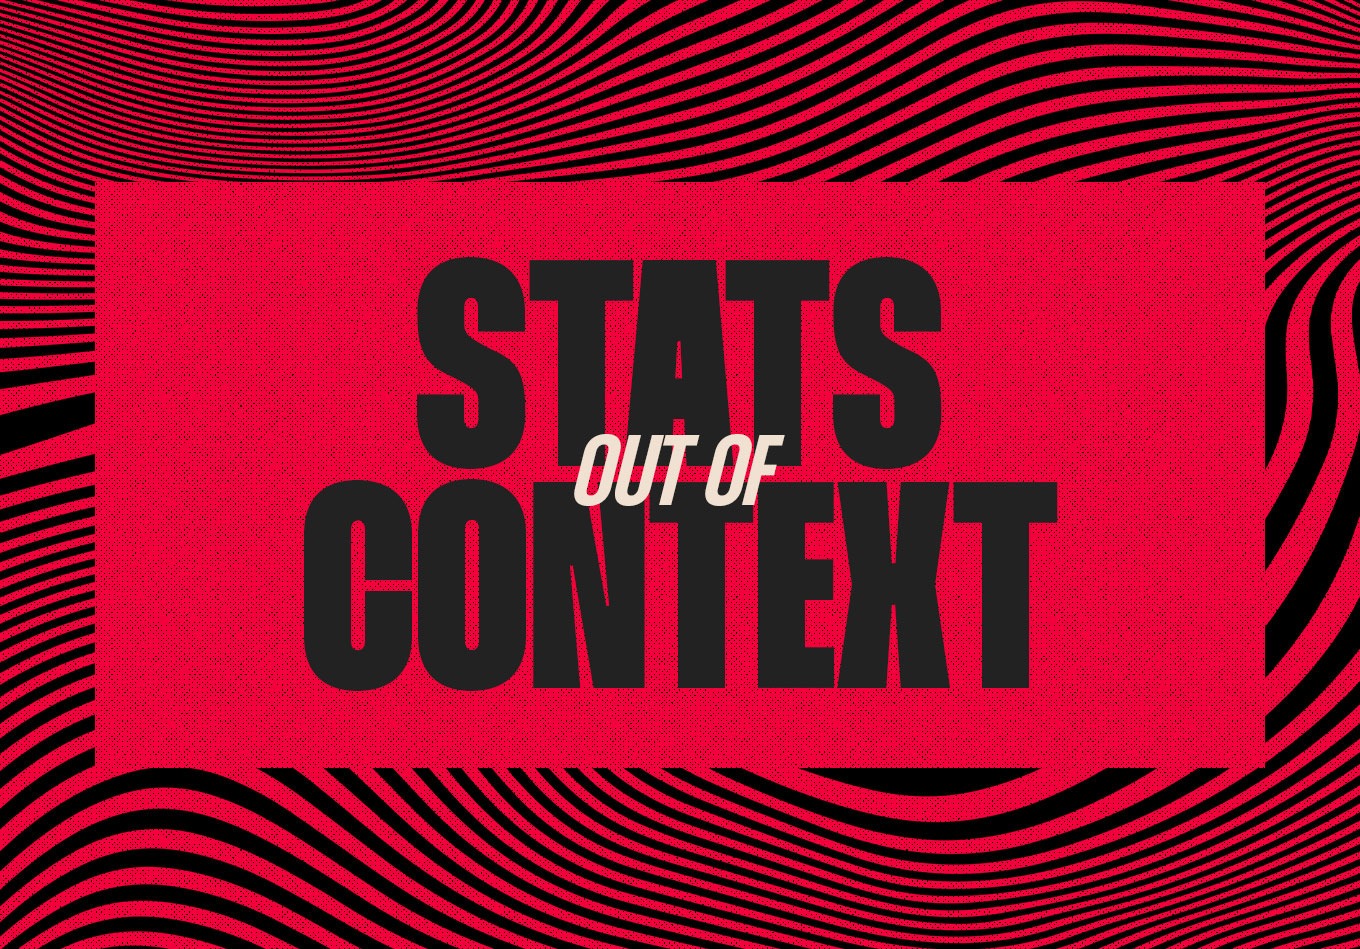 Premier League Red Card – Stats Out Of Context: Ep3